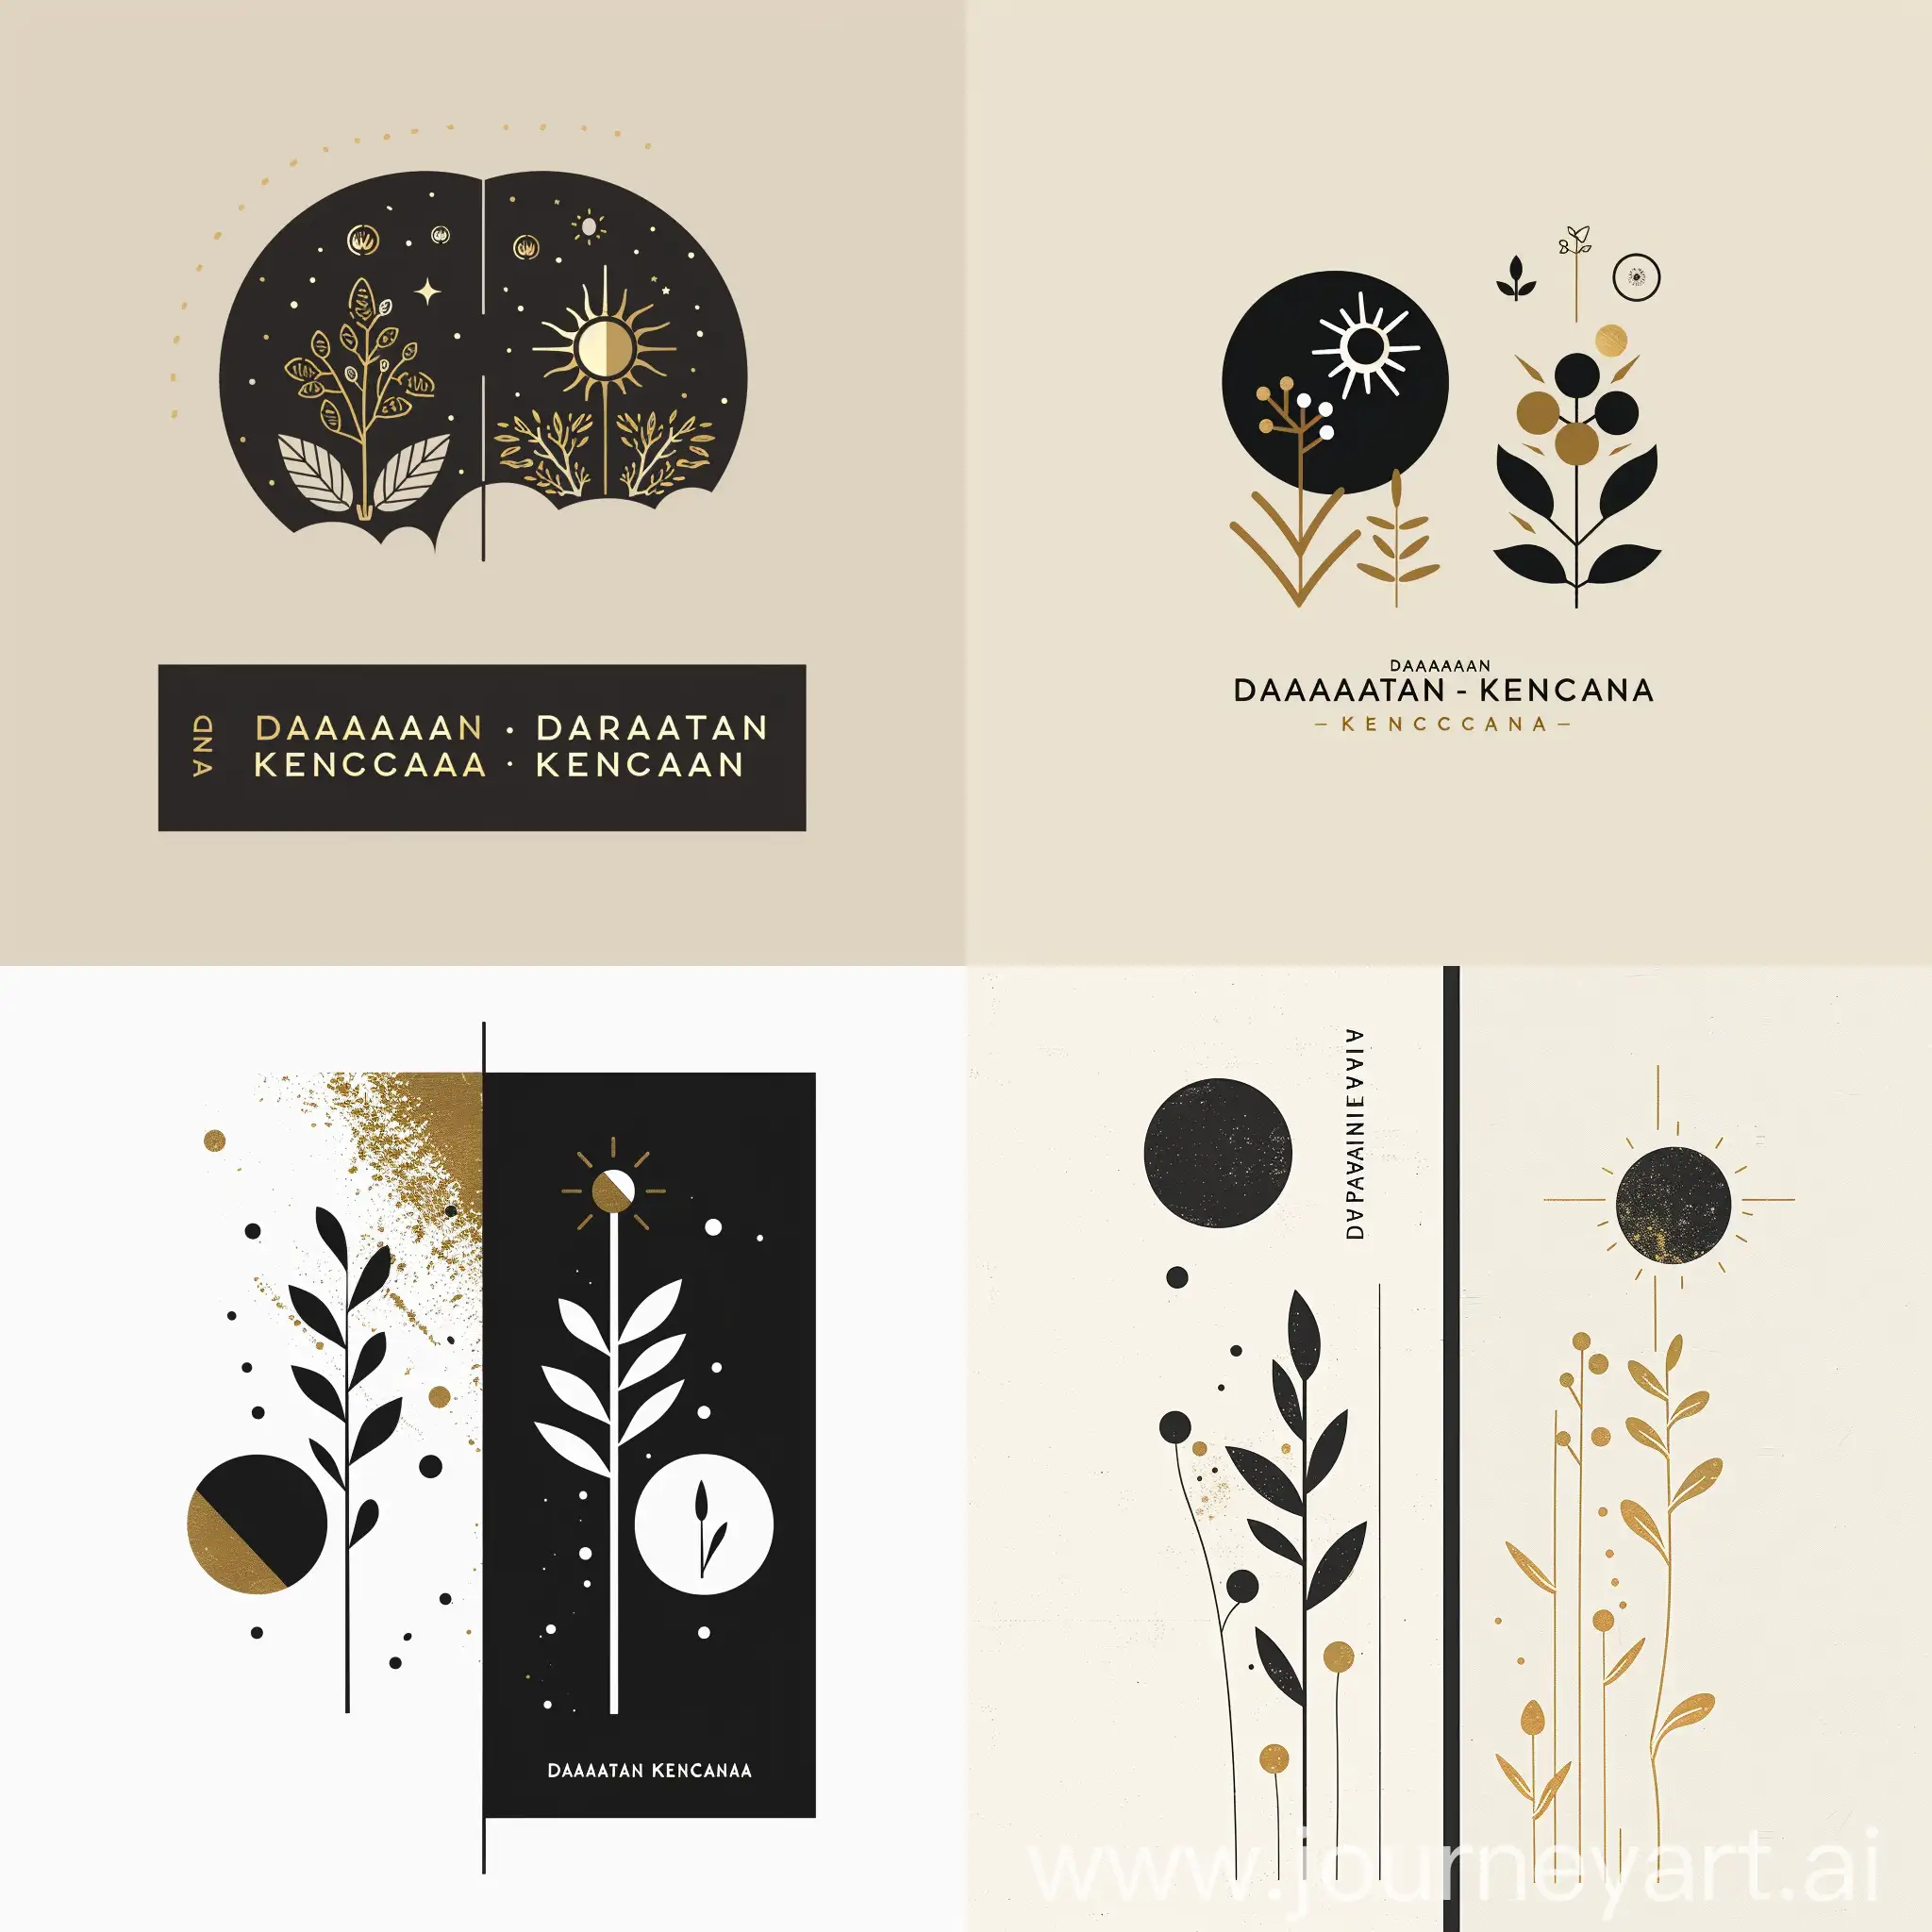 Minimalist-Fertiliser-Brand-Logo-Design-with-Plant-and-Sun-Icons-in-Black-White-and-Gold